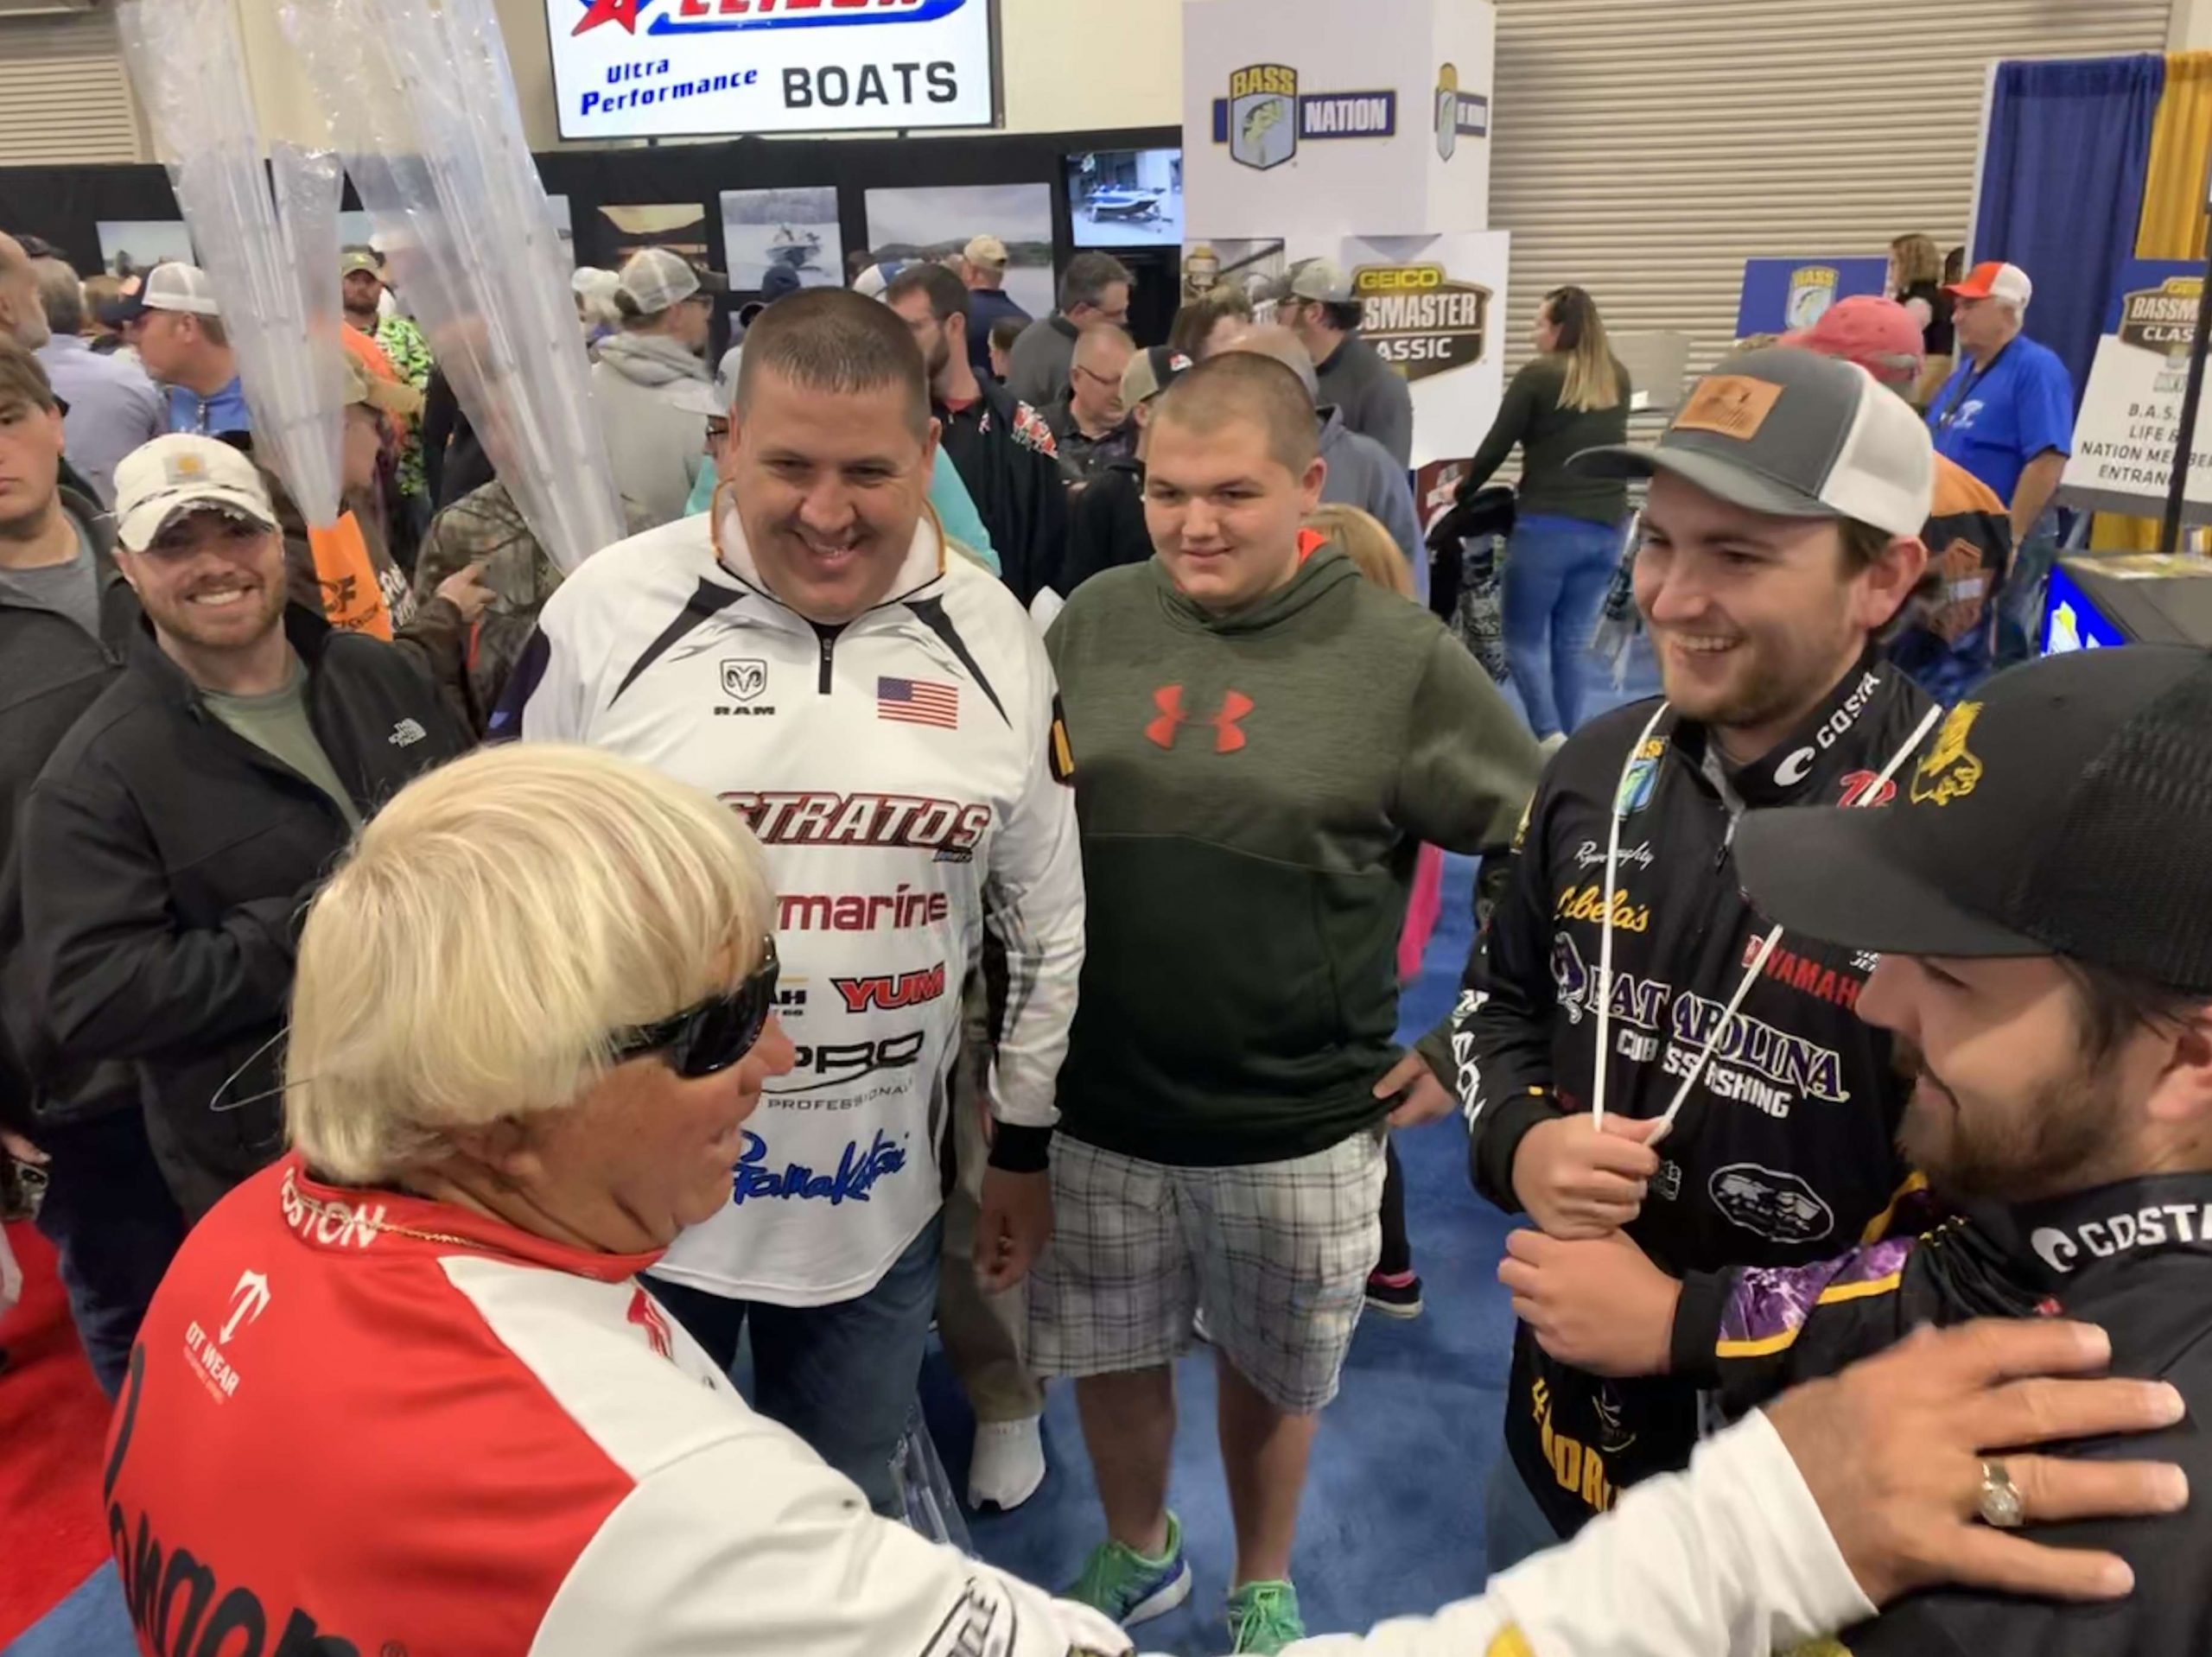 Open Saturday from 10 a.m. to 6 p.m. and Sunday from 10 to 4, the Expo is also a great place to see bass fishing legends. Visitors might be fortunate enough to engage with icons like Jimmy Houston, who’s always up to share a few good stories.